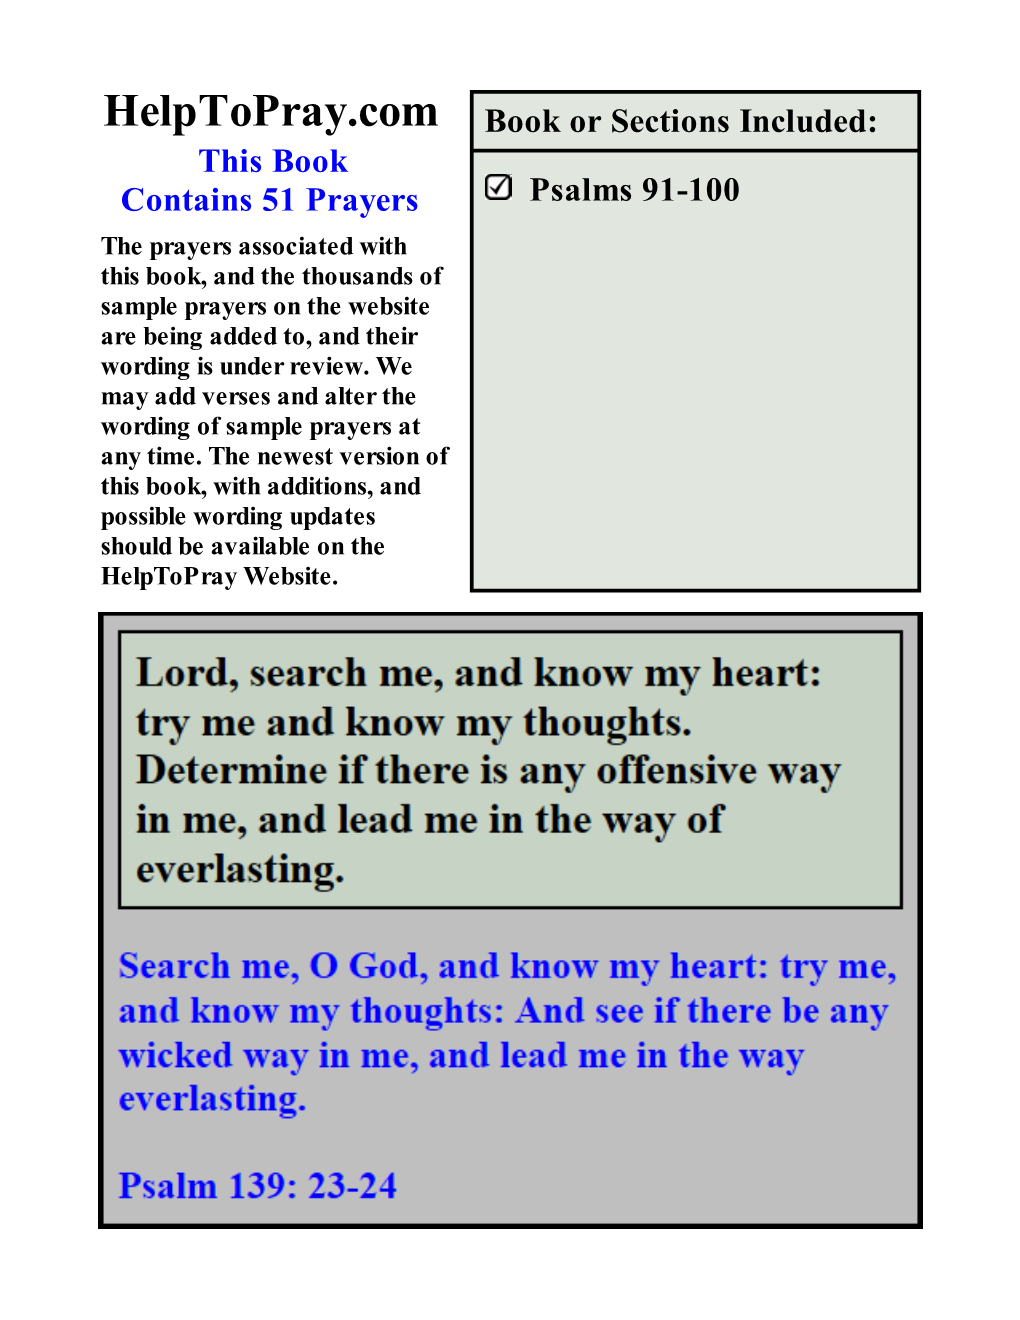 Psalms 91-100 the Prayers Associated with This Book, and the Thousands of Sample Prayers on the Website Are Being Added To, and Their Wording Is Under Review